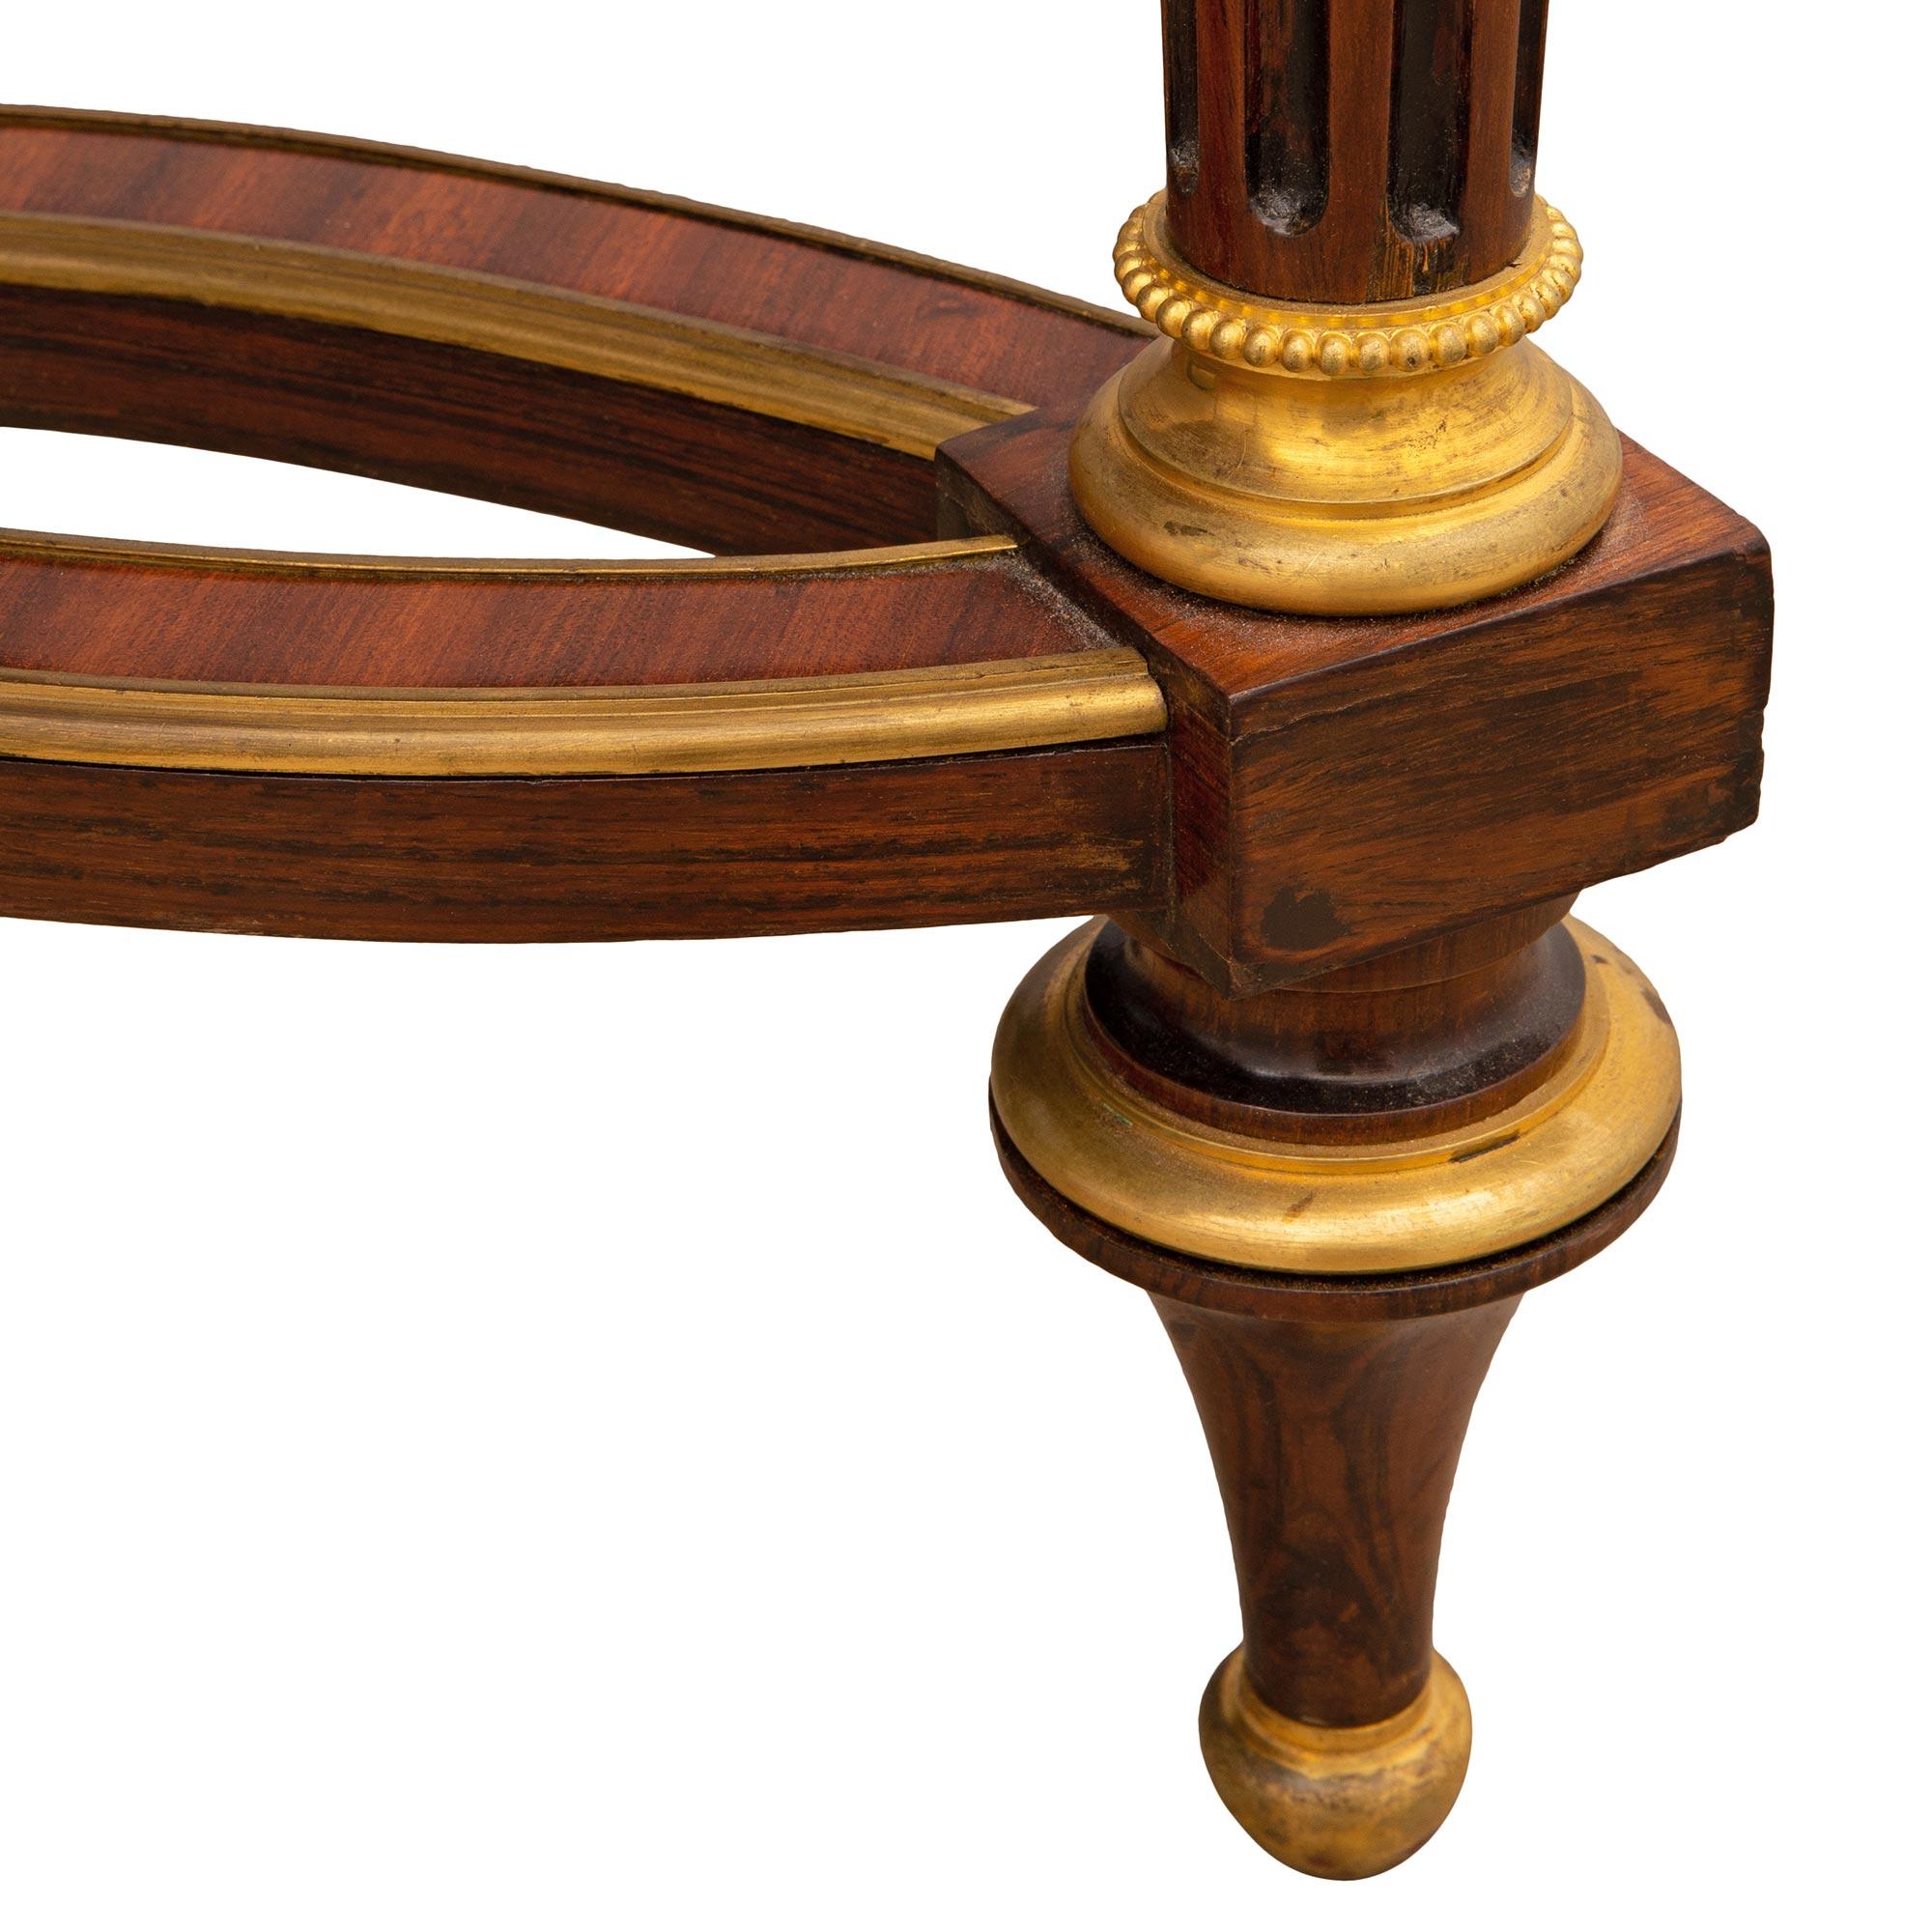 French 19th Century Louis XVI Style Tulipwood and Ormolu Center Table For Sale 8